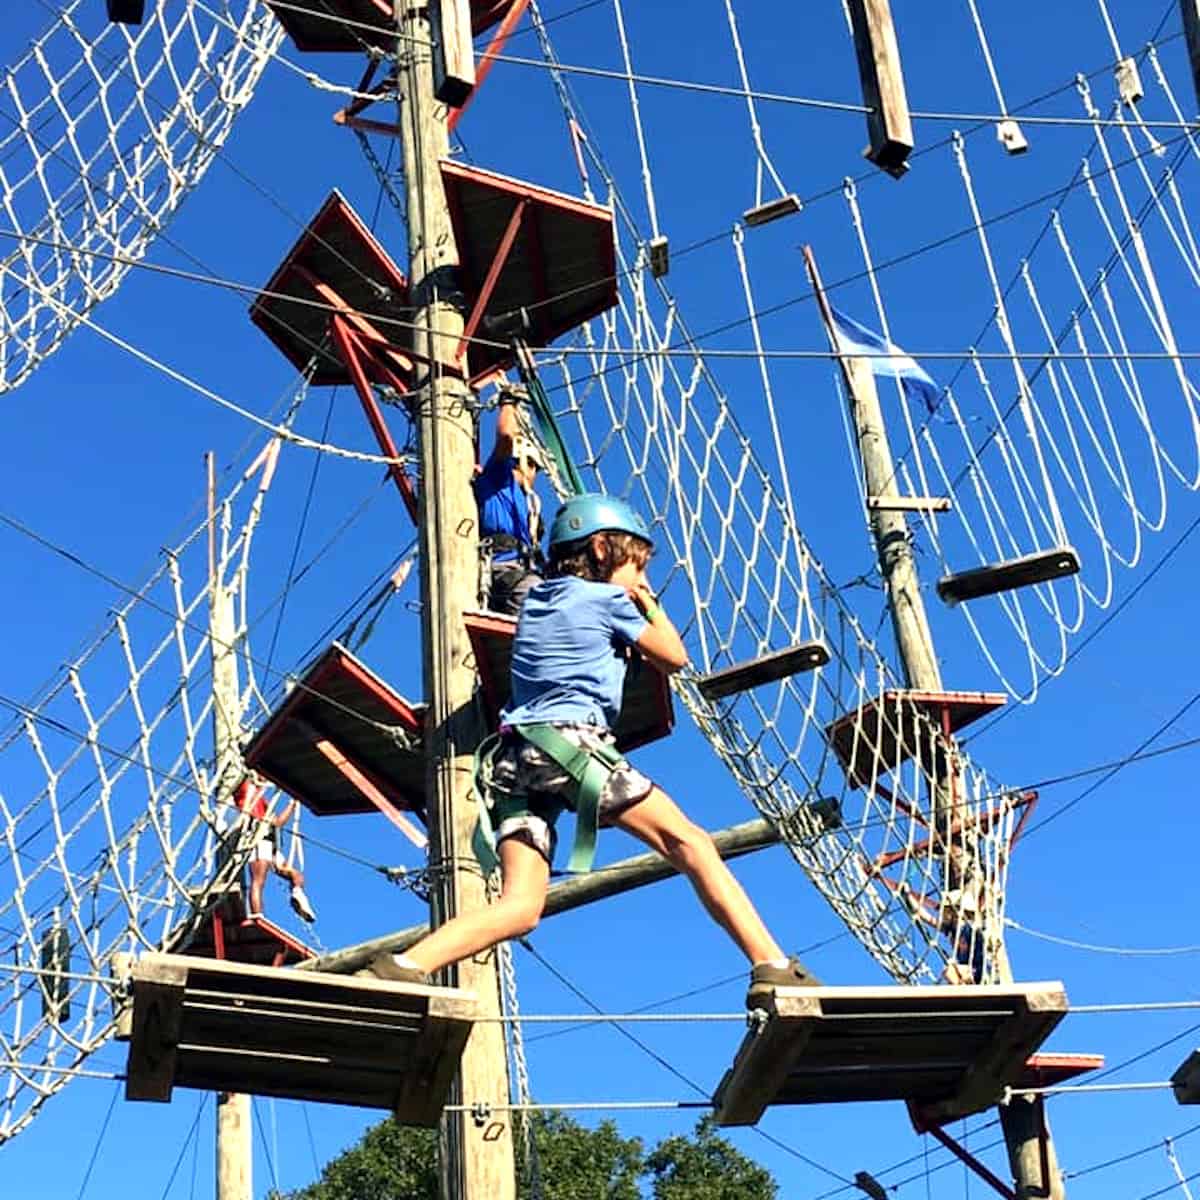 Rainard School for Gifted Children Field Trip to Ropes Course